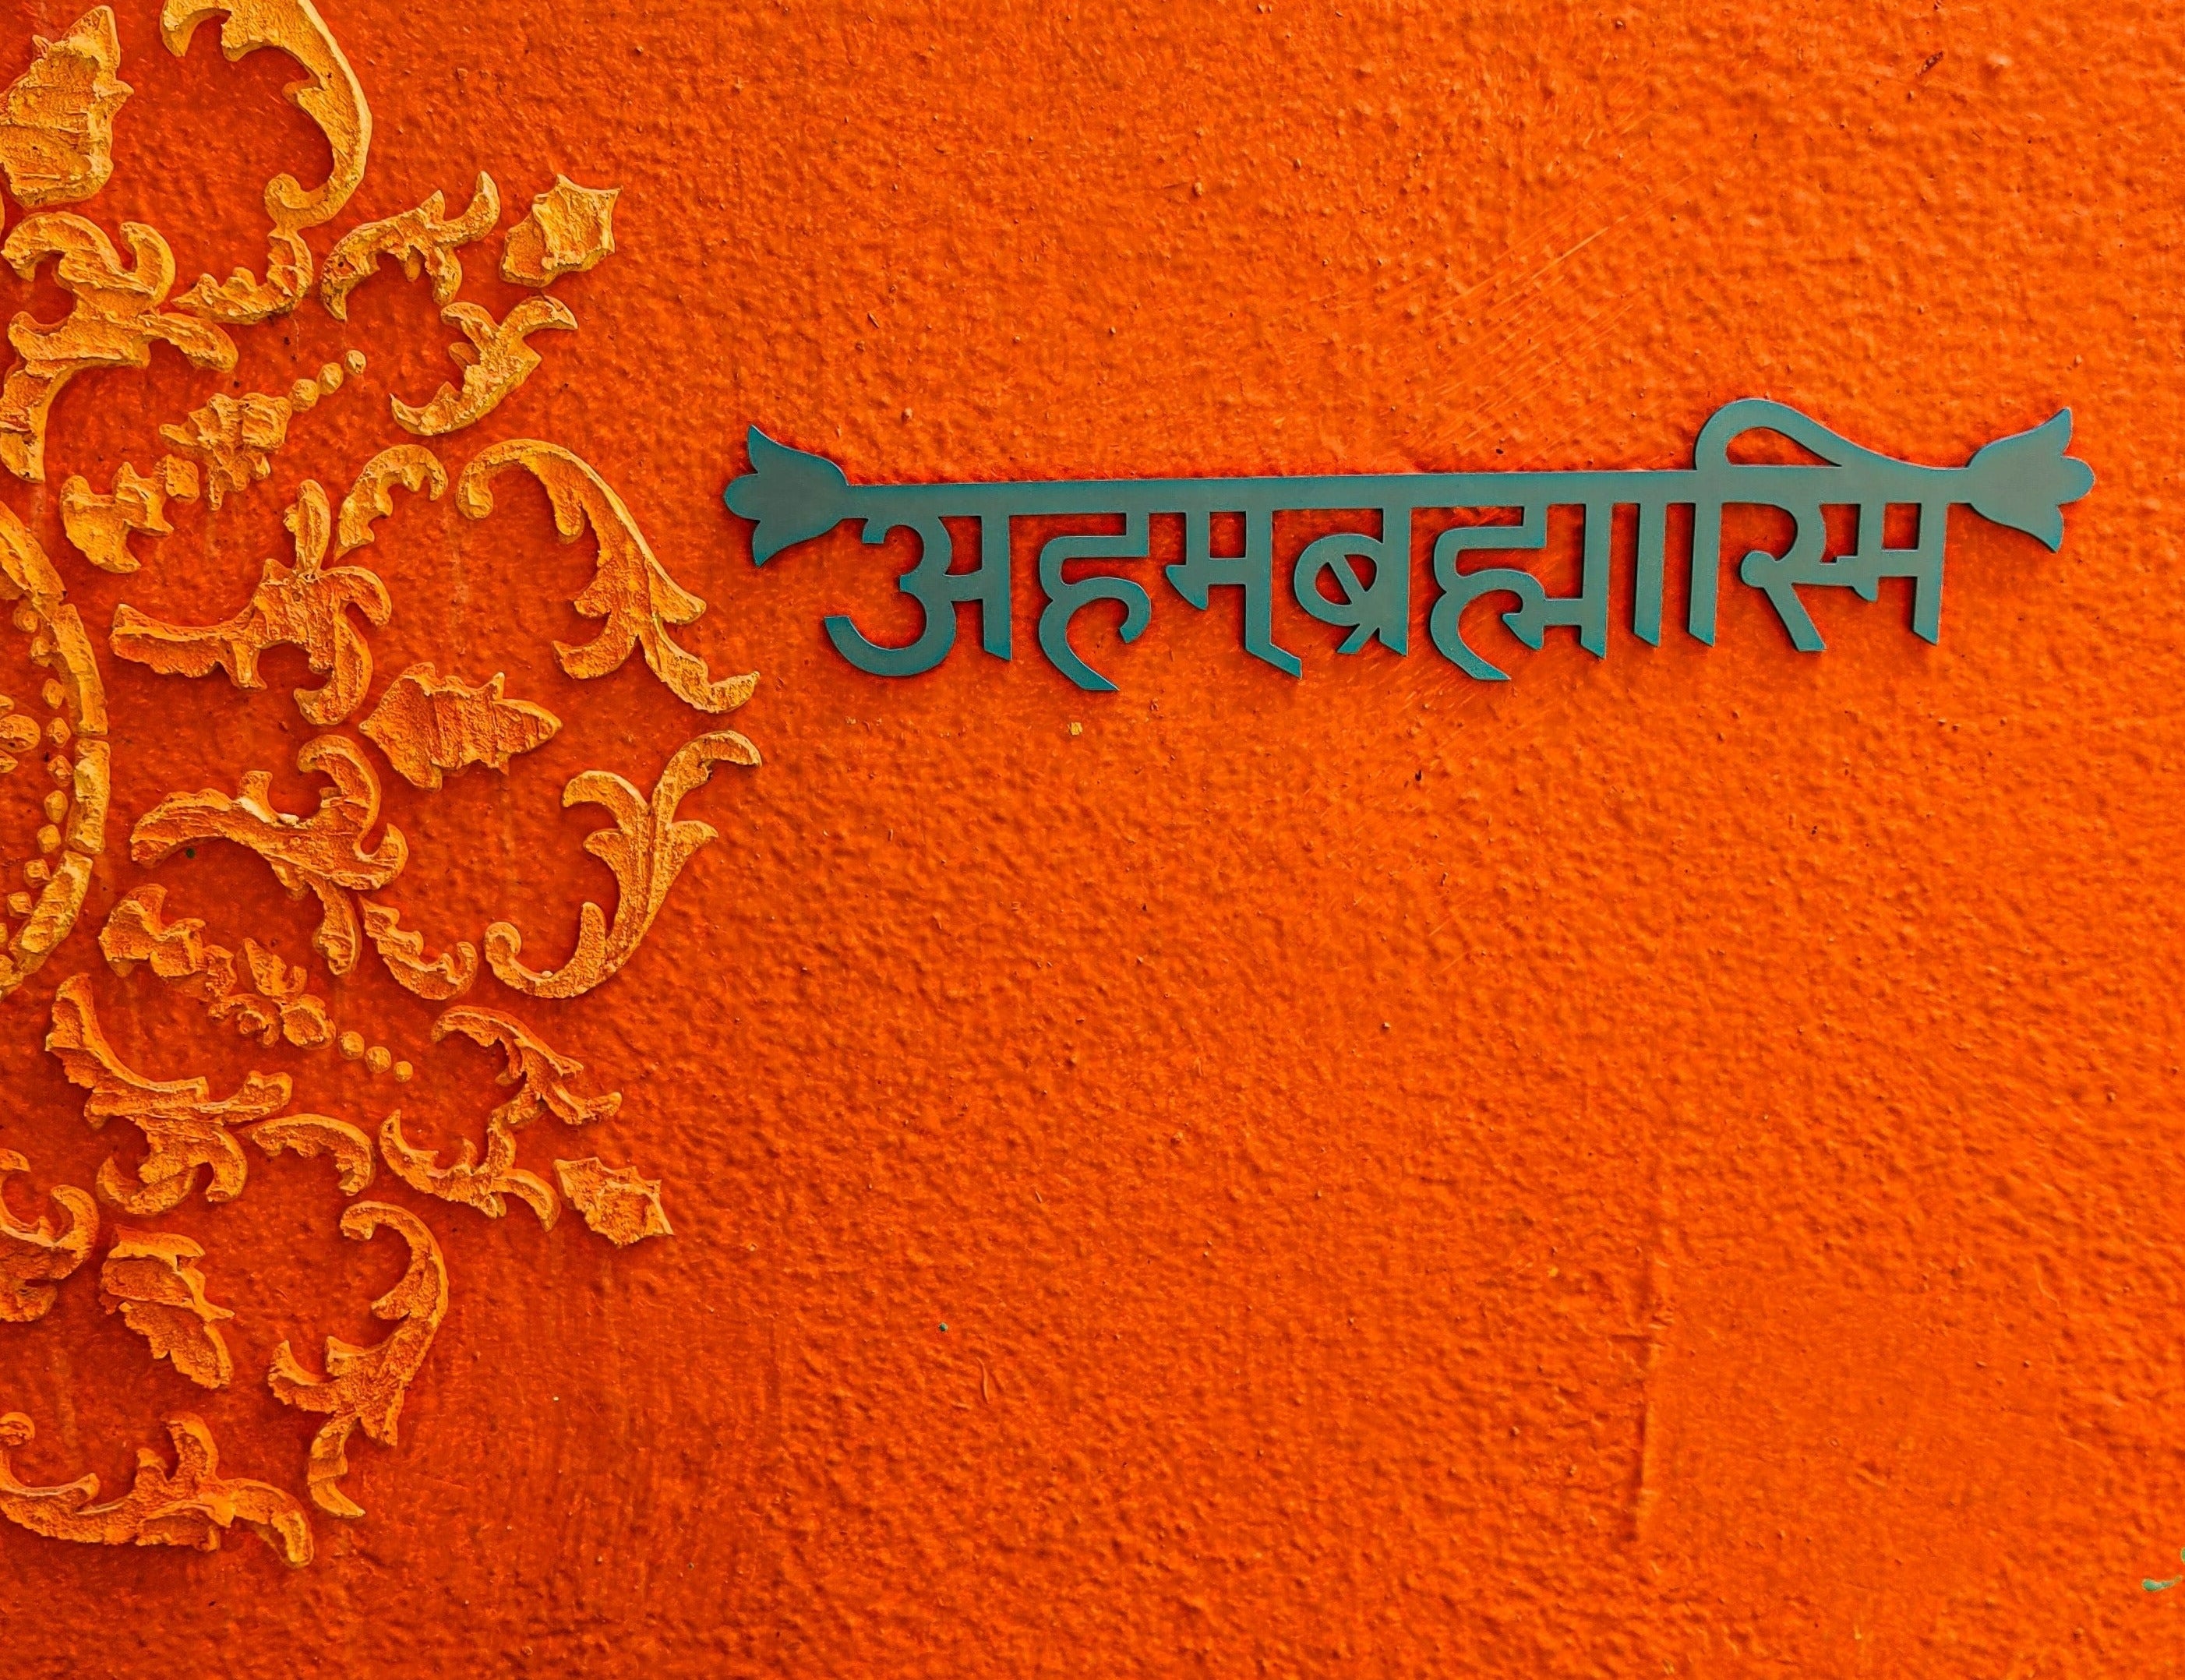 Buy Wall decor Products online with "Aham Brahmasmi" quote